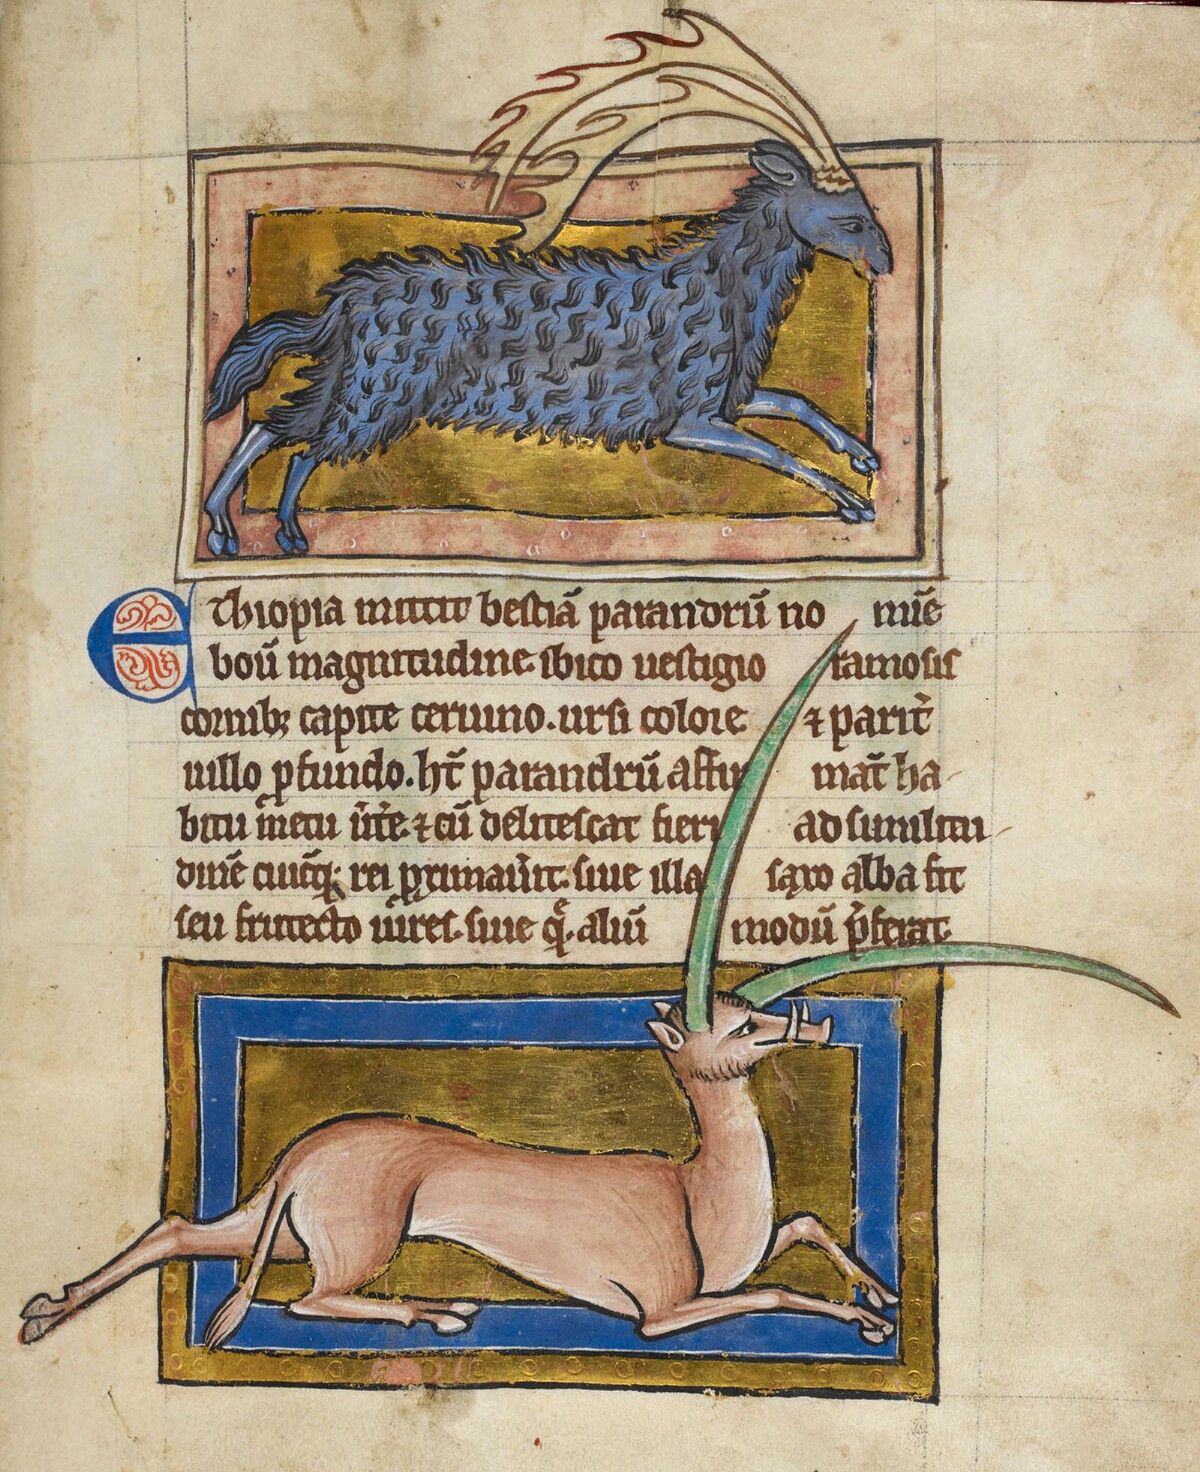 Parandrus in a bestiary, about 1200–1210, English. Parchment, 8 11/16 × 6 5/16 in. The British Library